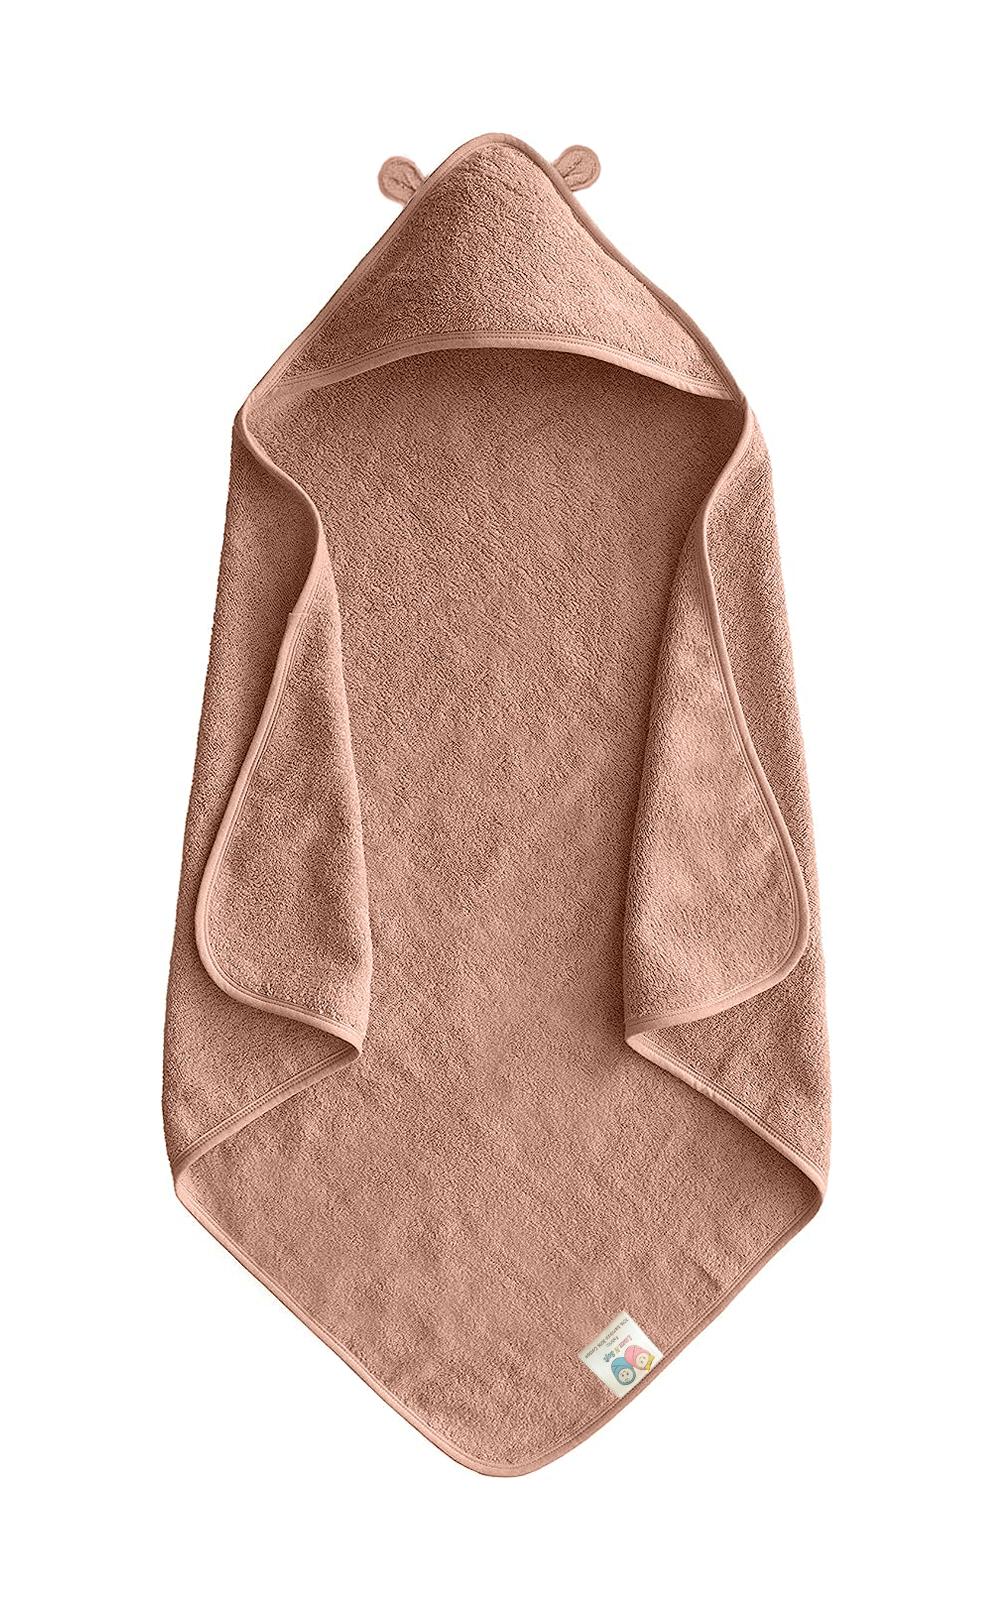 Luxe N Soft Premium Baby Hooded Towel ,Super Soft and Absorbent , Cute Animal Design, Ideal for Newborns and Toddlers, Perfect Baby Shower Gift